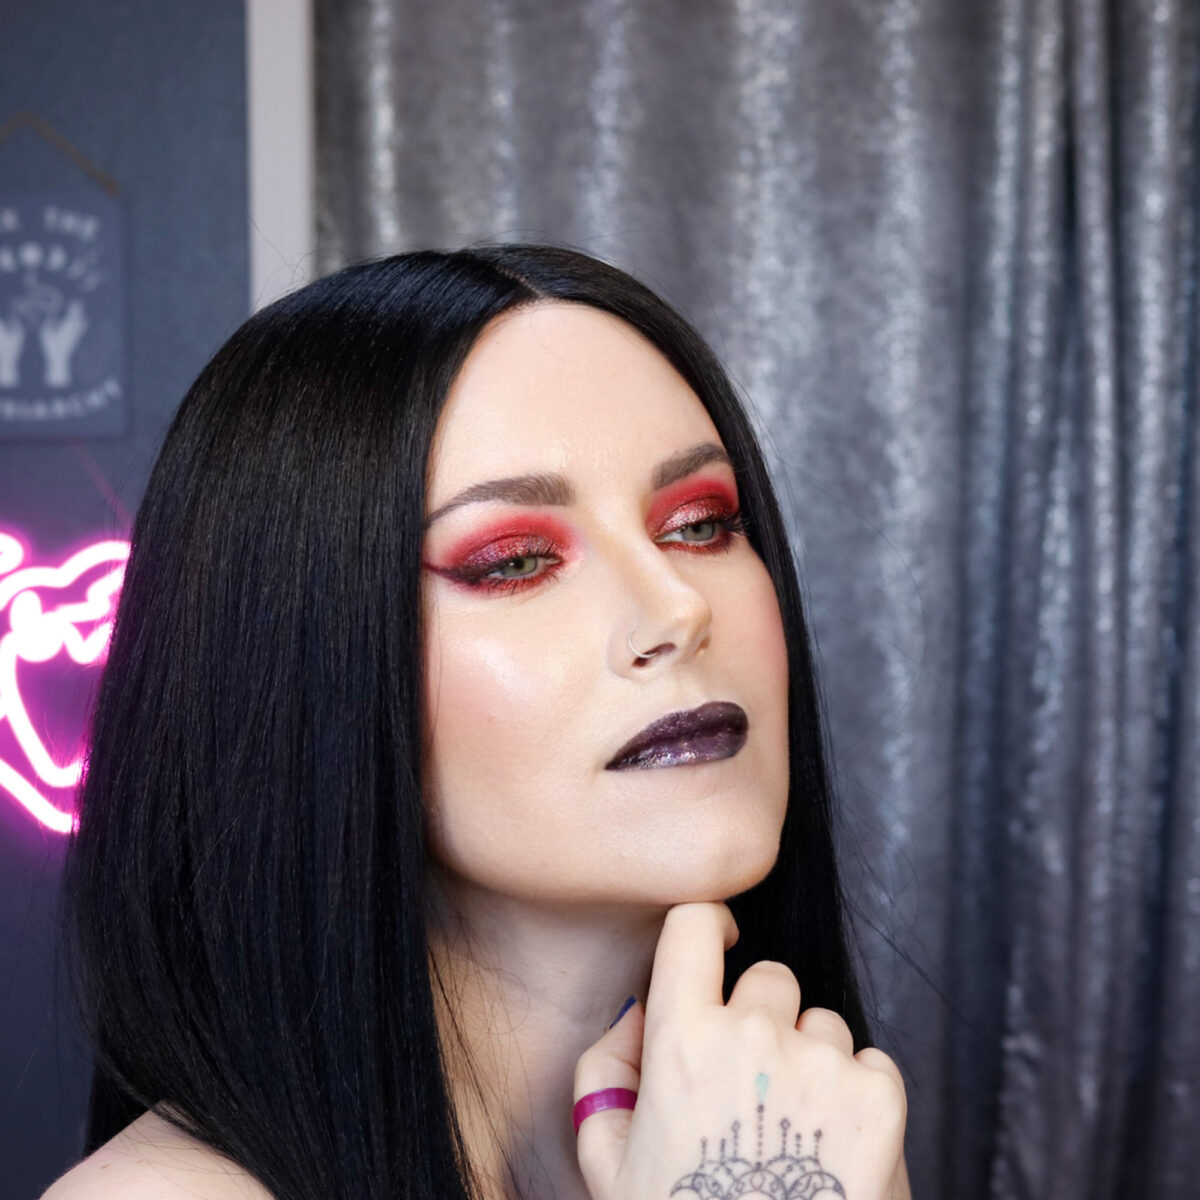 Gothic Beauty Cordelia is wearing red and black makeup inspiration